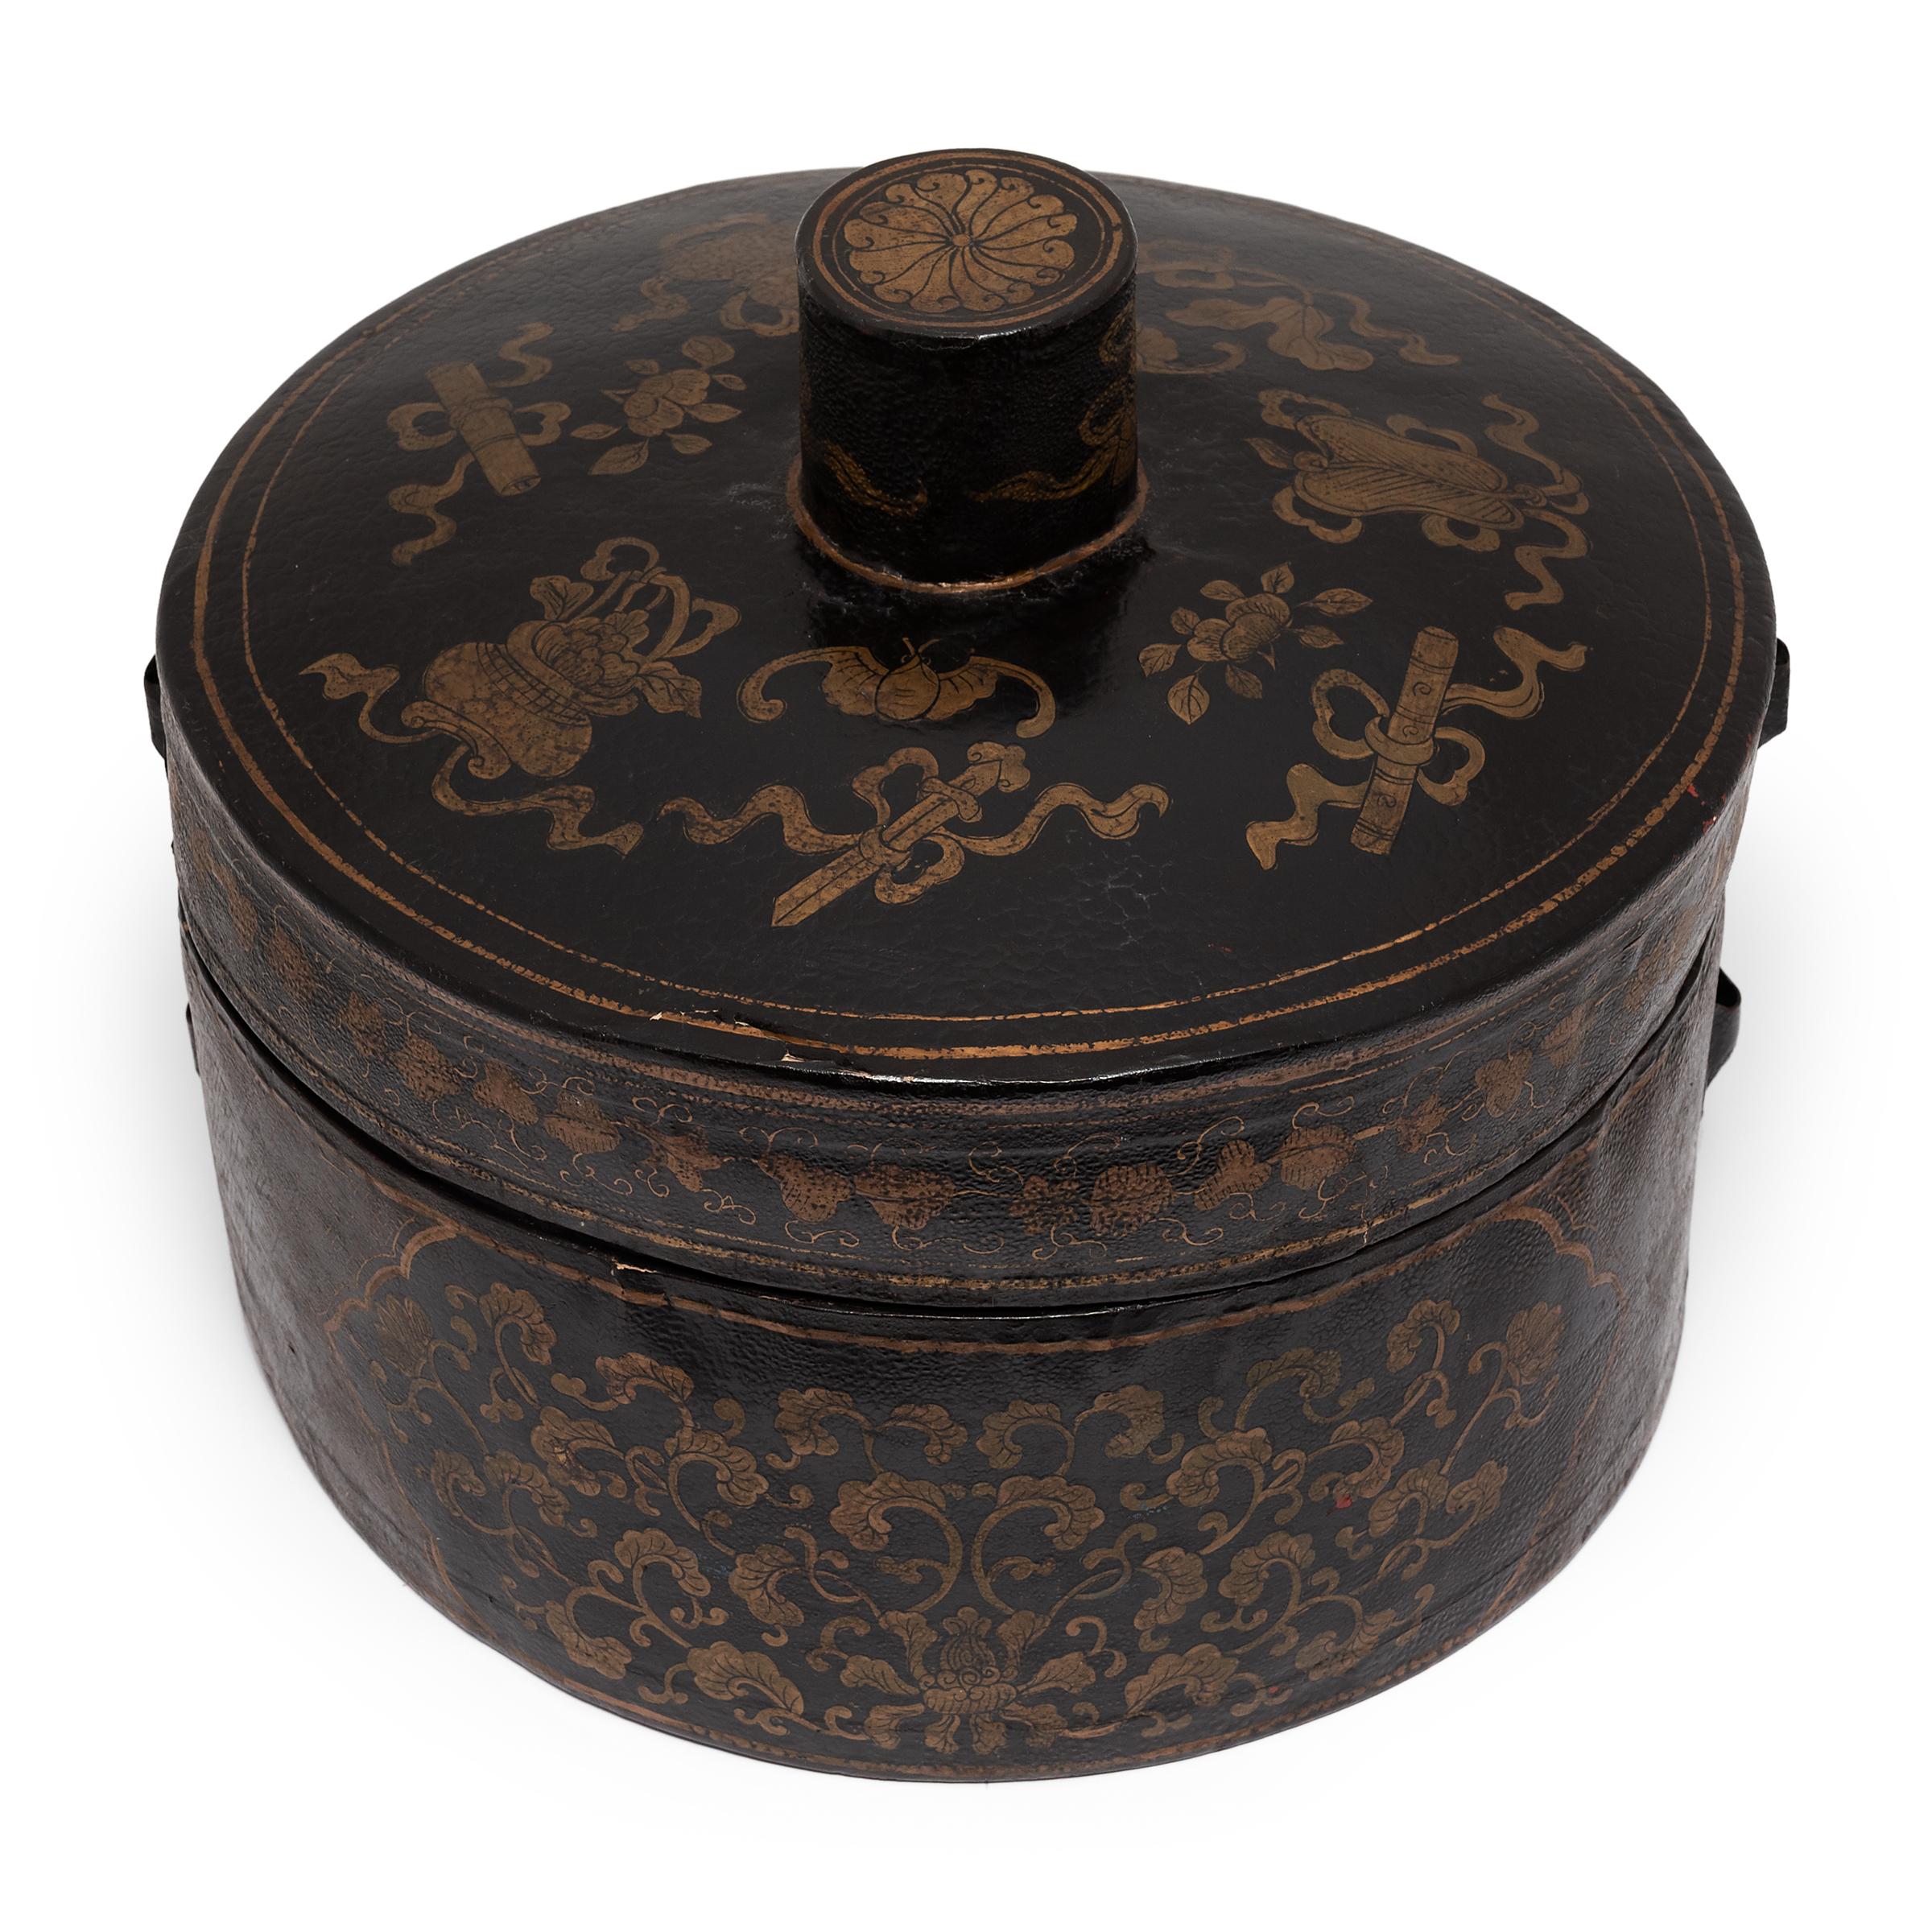 Lacquered Chinese Gilt Eight Immortals Hat Box, c. 1900